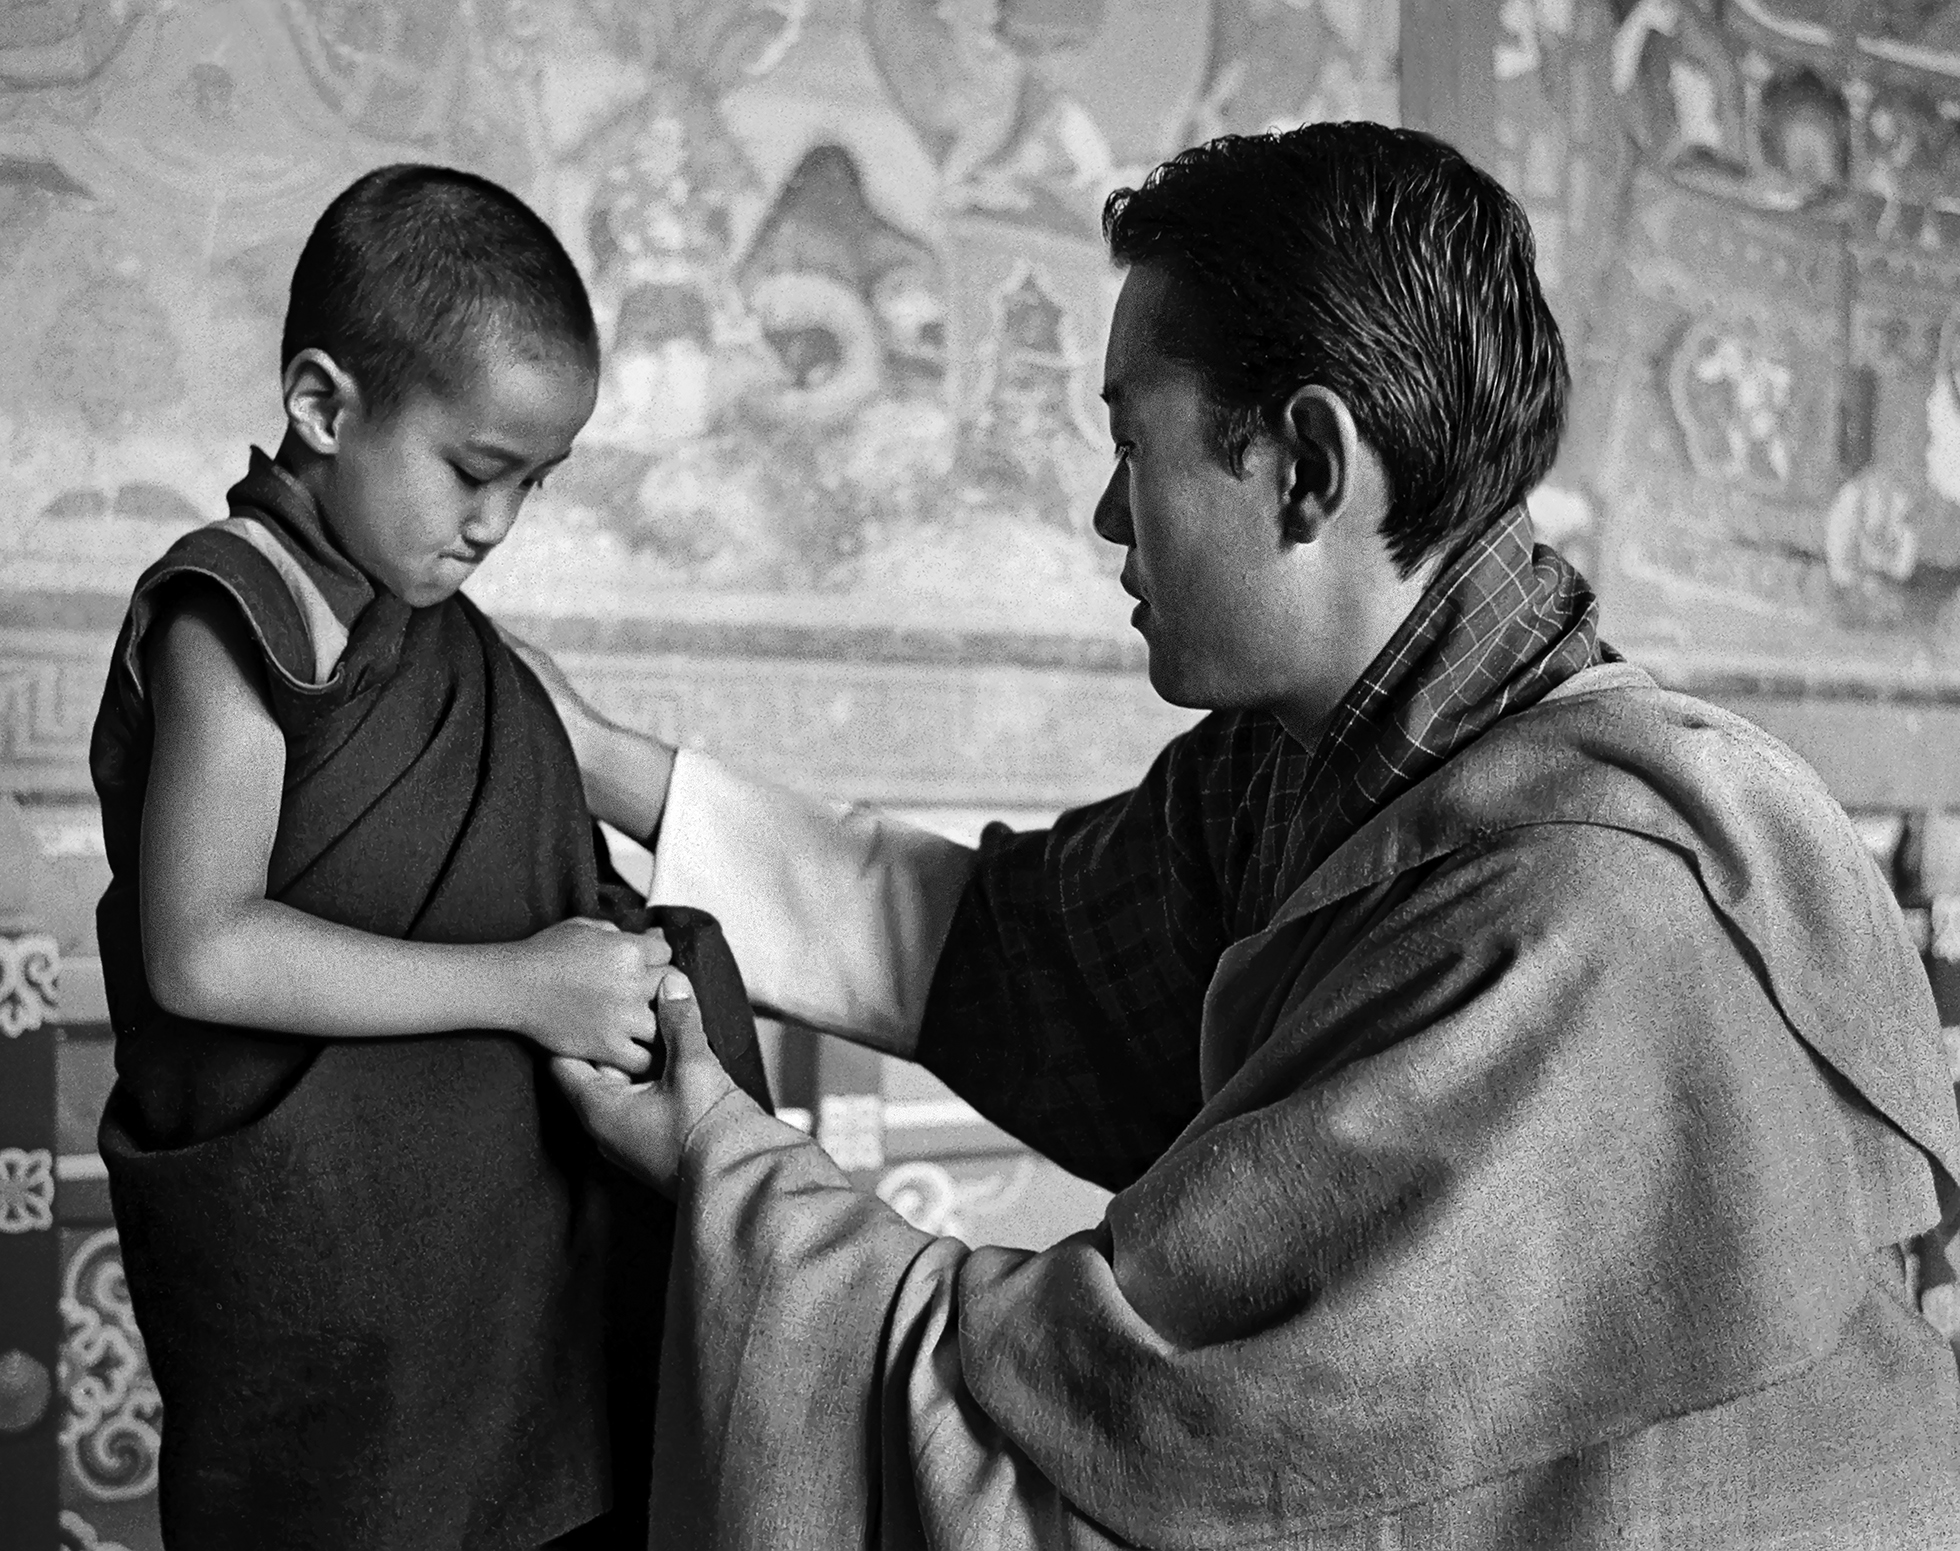 The Crown Prince of Bhutan (at the time of the photo) kneels down and places his hand on a young monk’s shoulder as he speaks to him. The young monk looks disappointed in something.